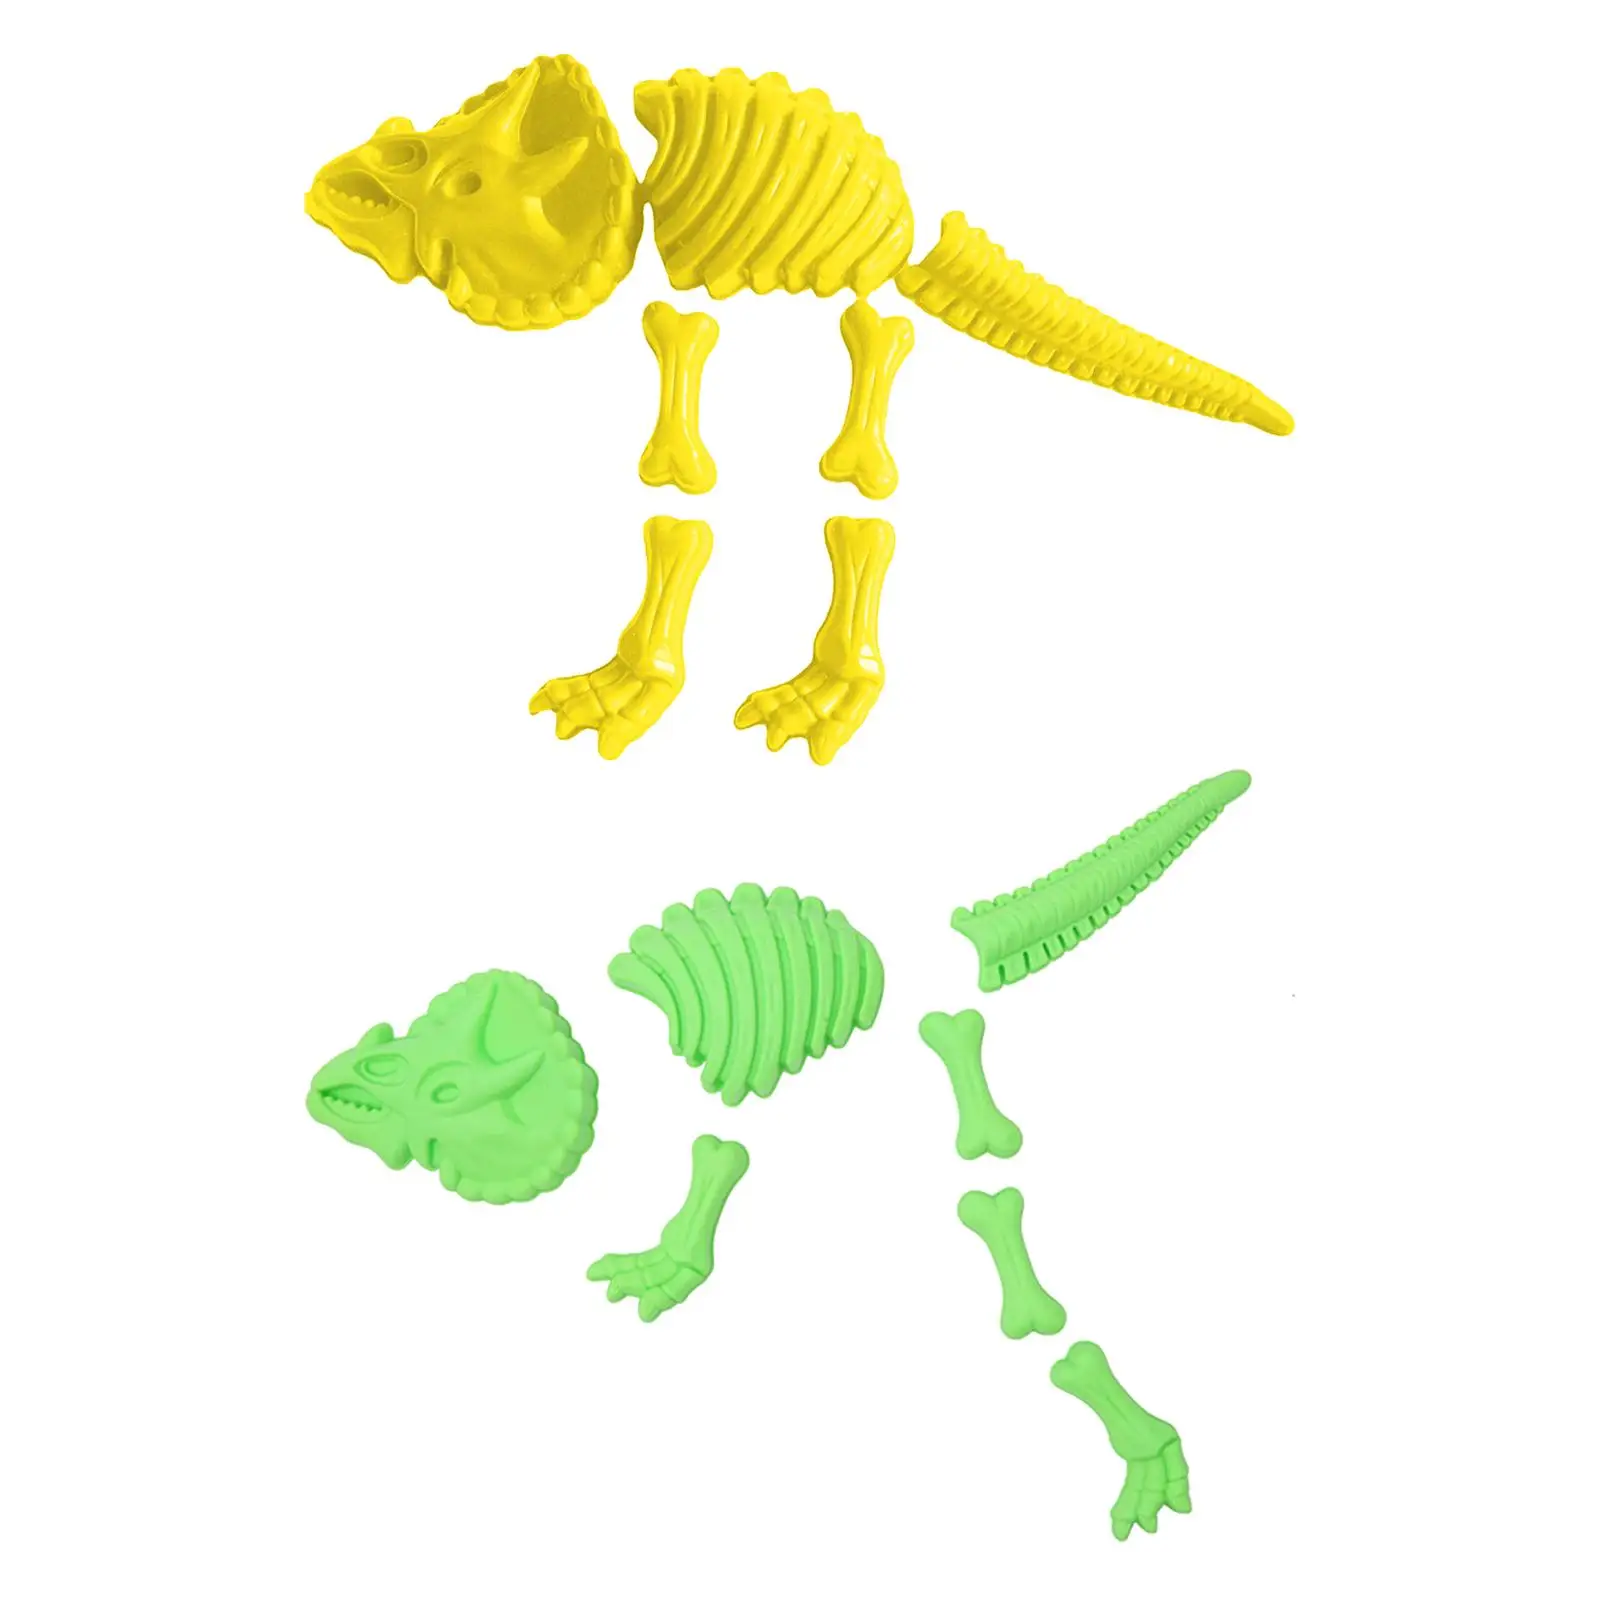 

7Pcs Play Sand Skeleton Dinosaur Toys Beach Accessories Beach Toy Model Set for Children Kids Age 2 3 4 5 6 8 Boys and Girls